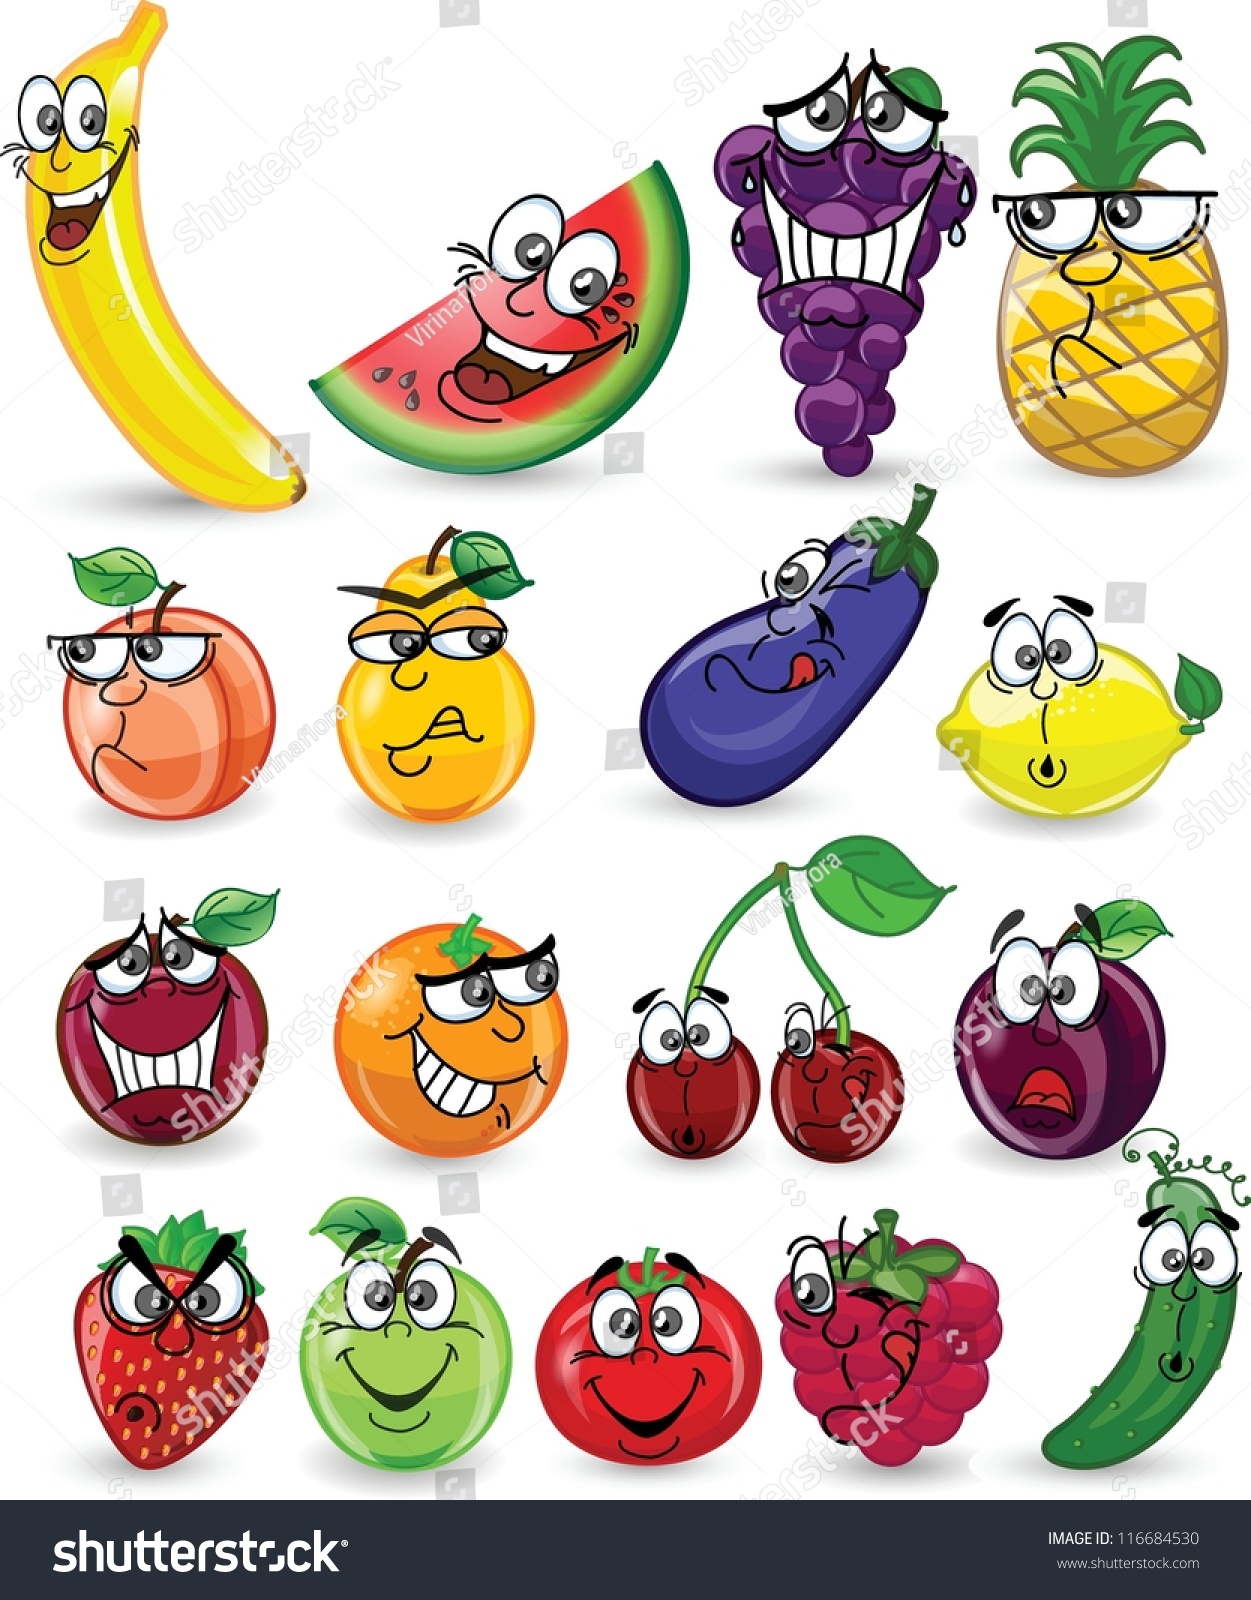 Cartoon Fruits And Vegetables Stock Vector Illustration 116684530